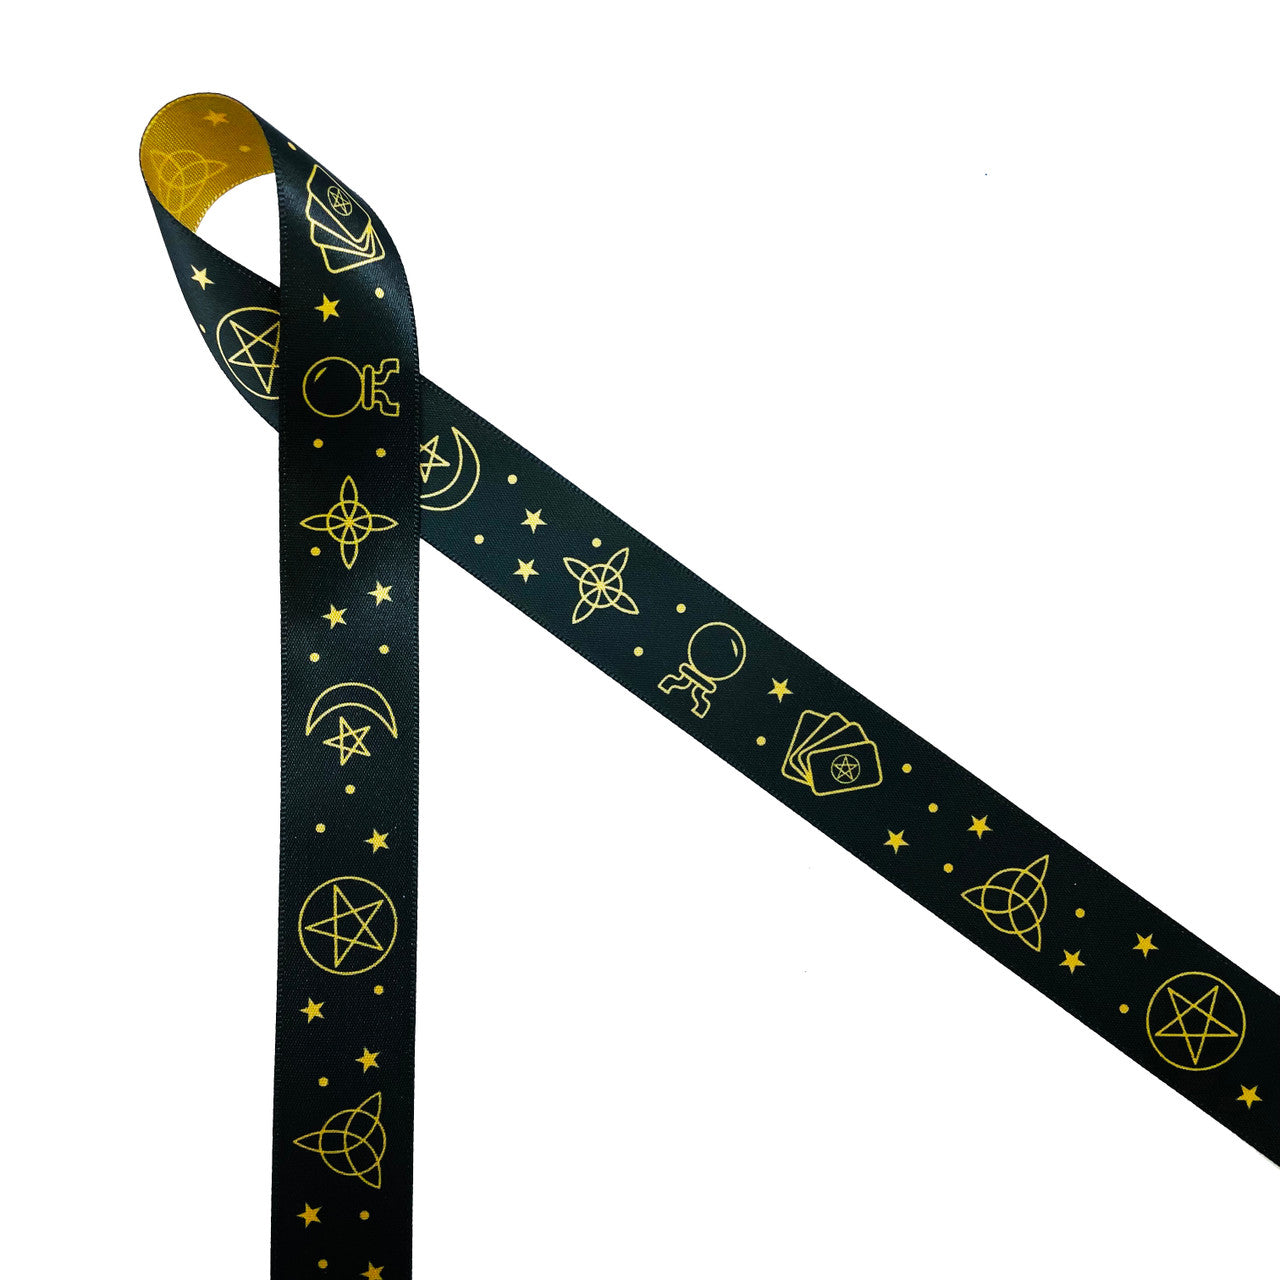 LOUIS VUITTON Red Gift Ribbon with Gold Lettering 2 yards